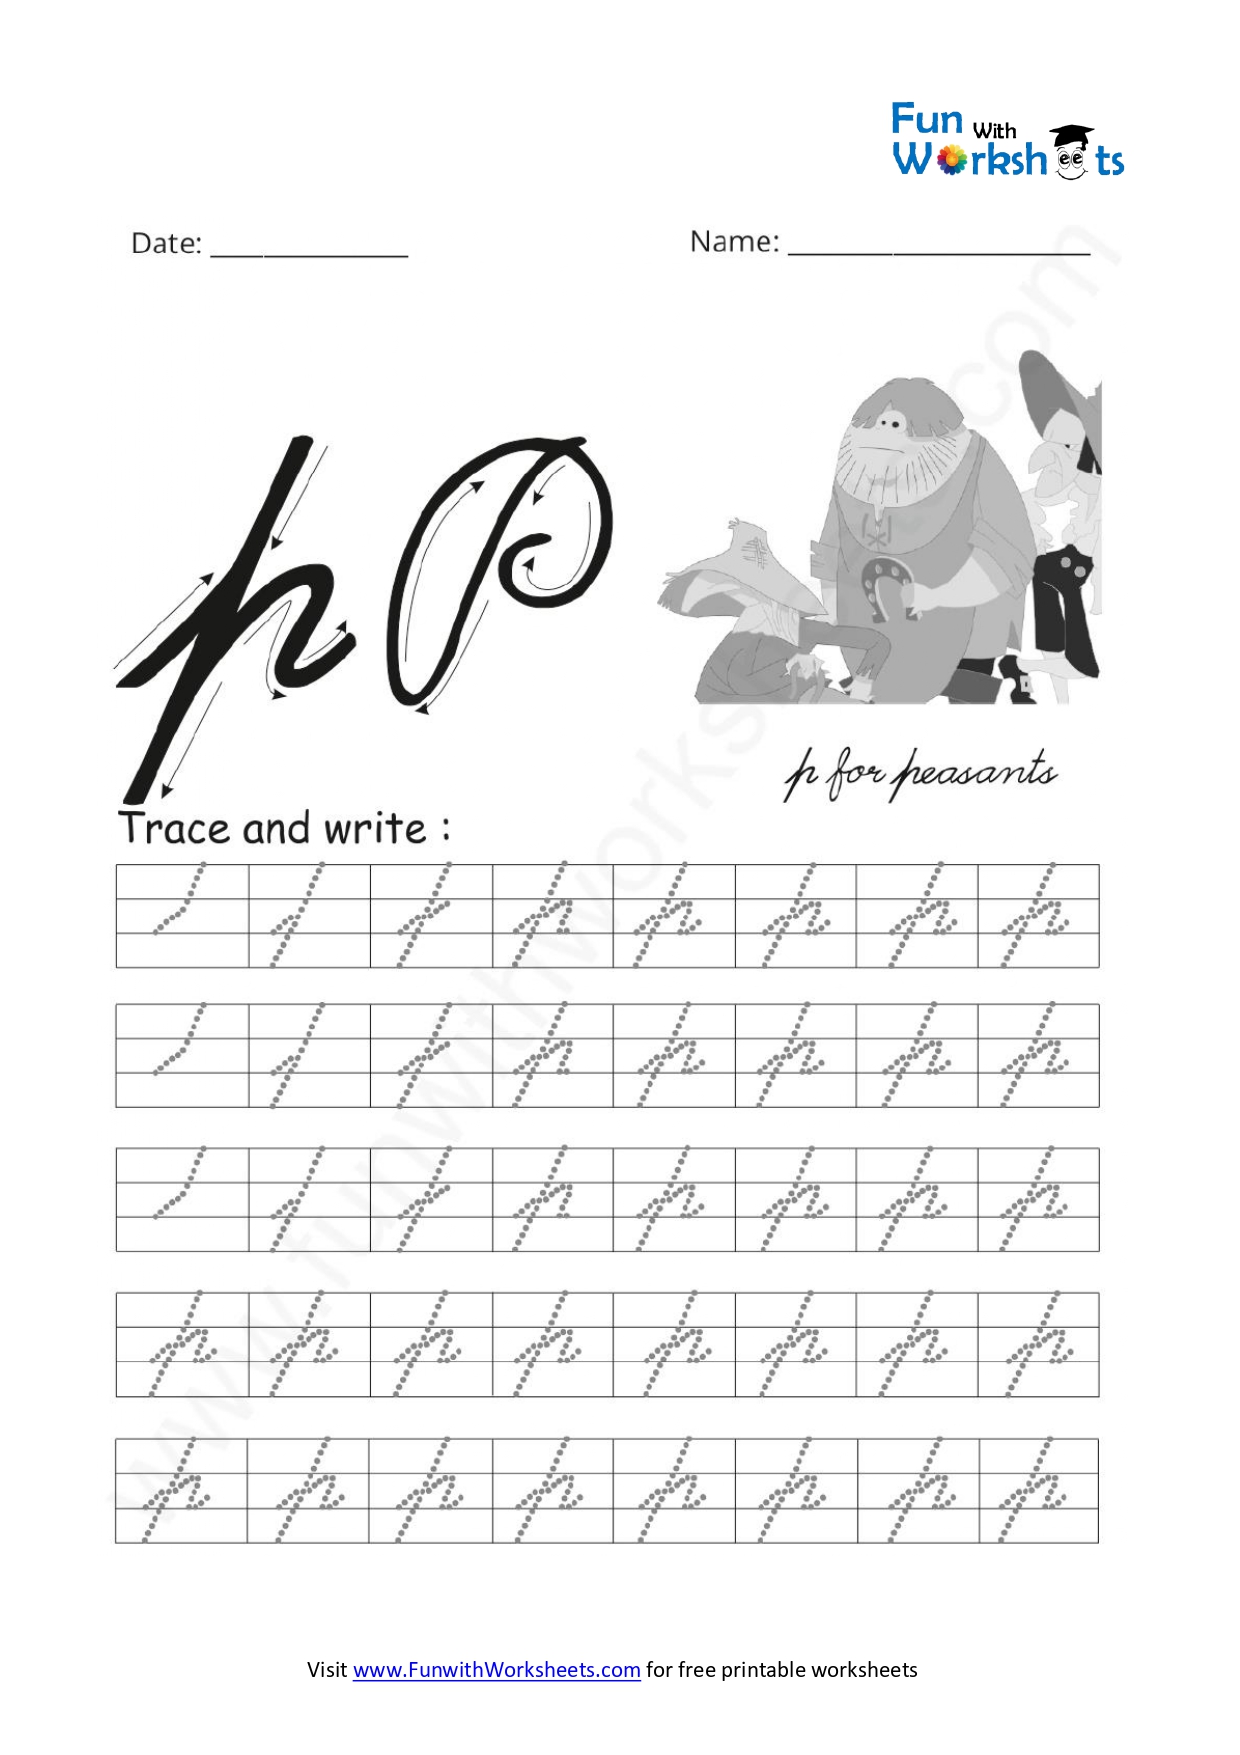 numbers-1-to-100-spellings-in-cursive-writing-worksheets-suryascursive-com-spelling-and